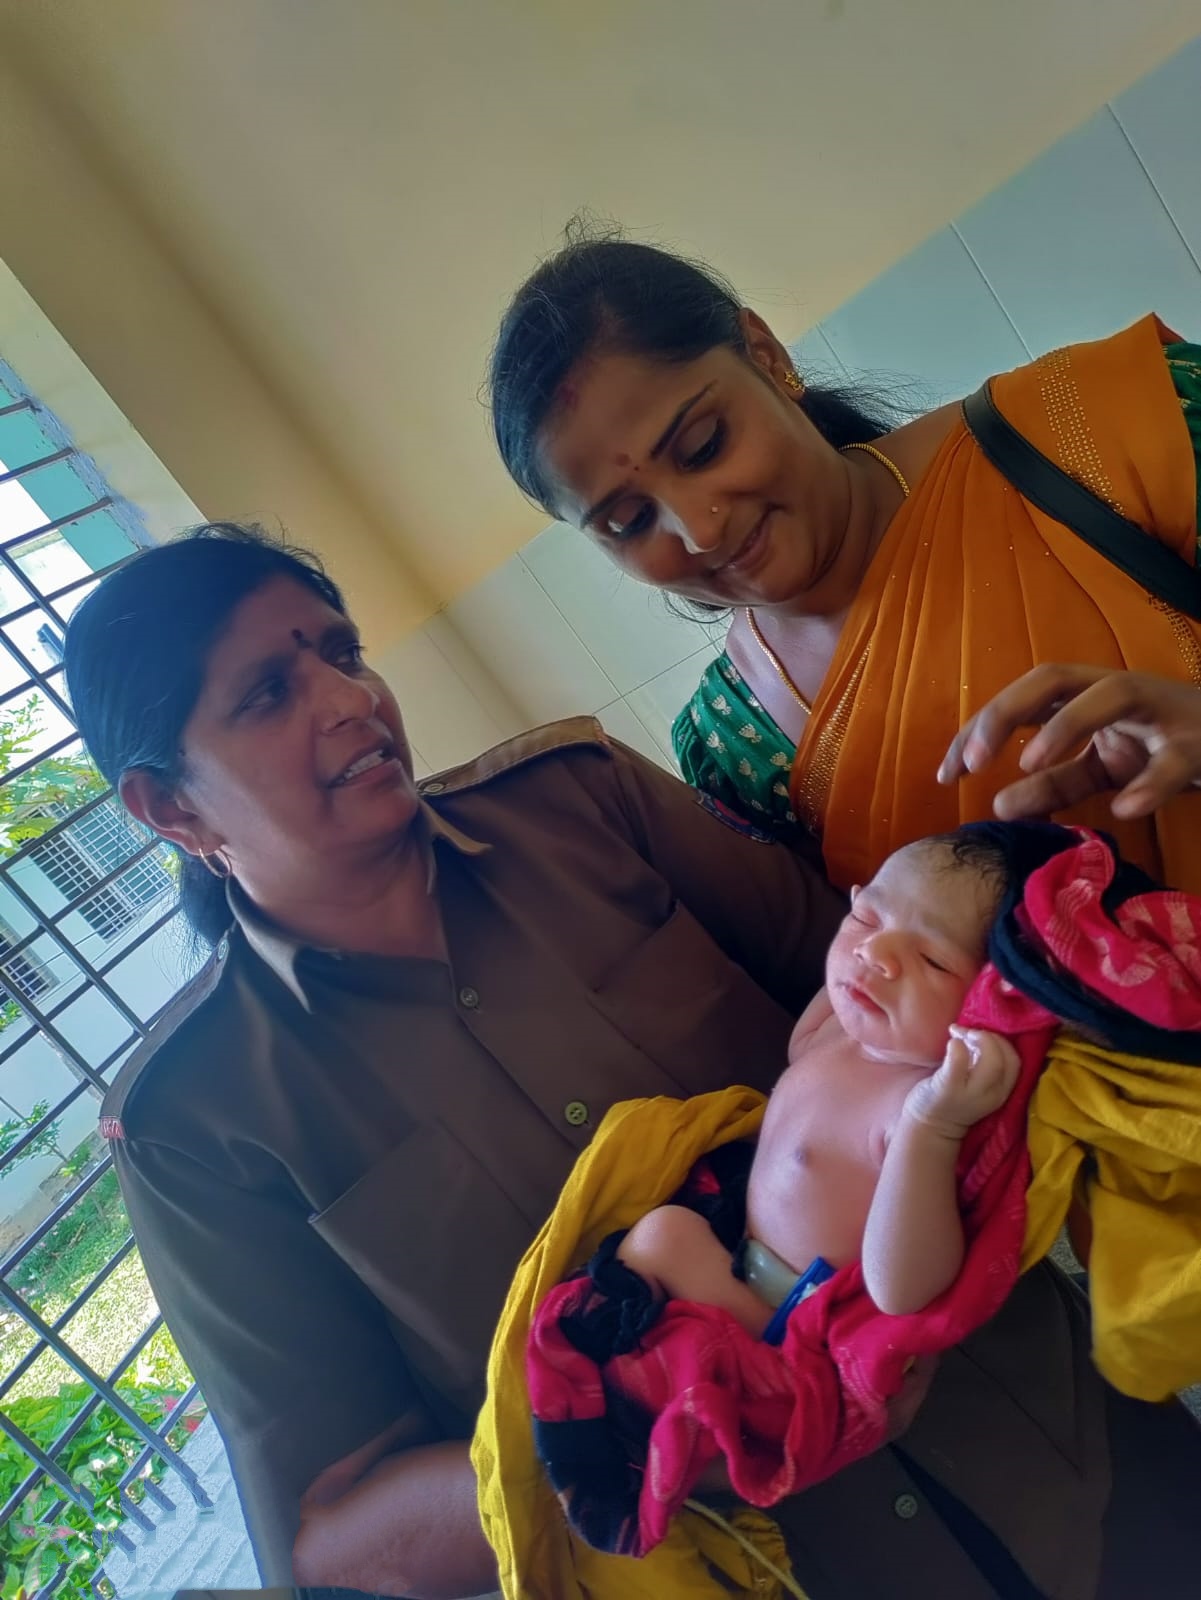 pregnant delivery a baby in bus in karnataka